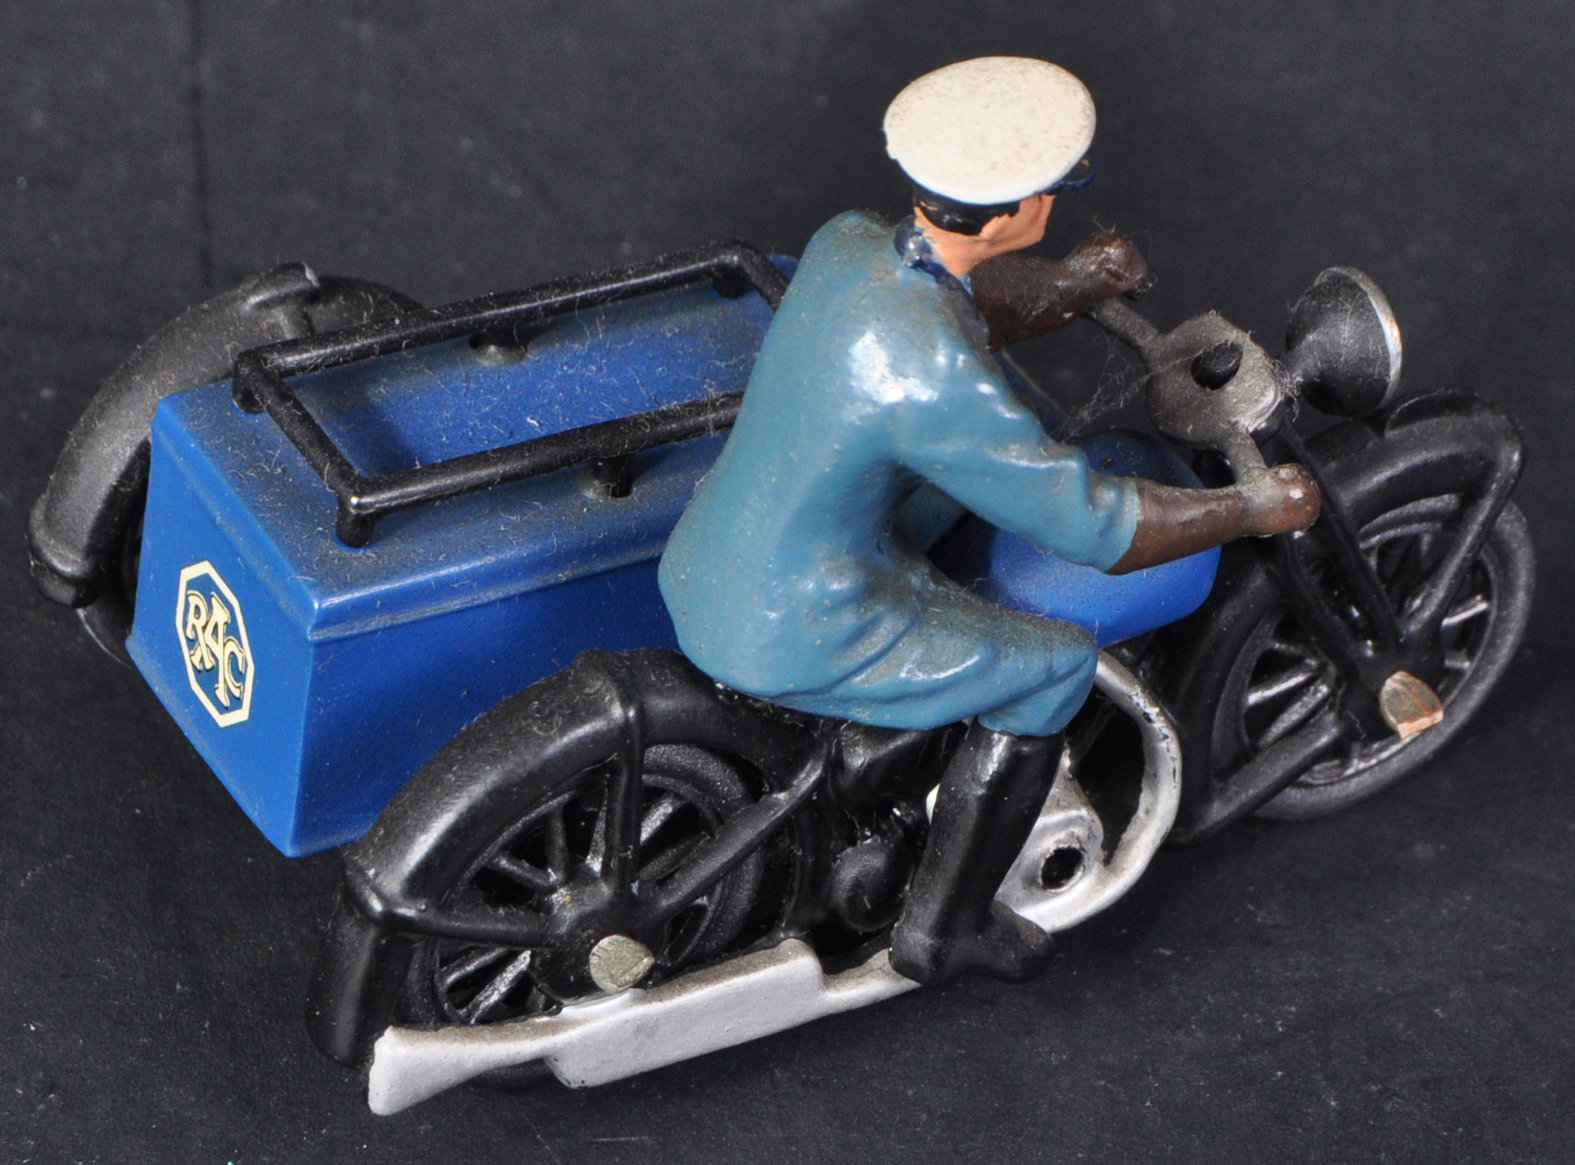 TWO VINTAGE DGM DAVE GILBERT MODELS DIECAST MOTORBIKES - Image 3 of 7